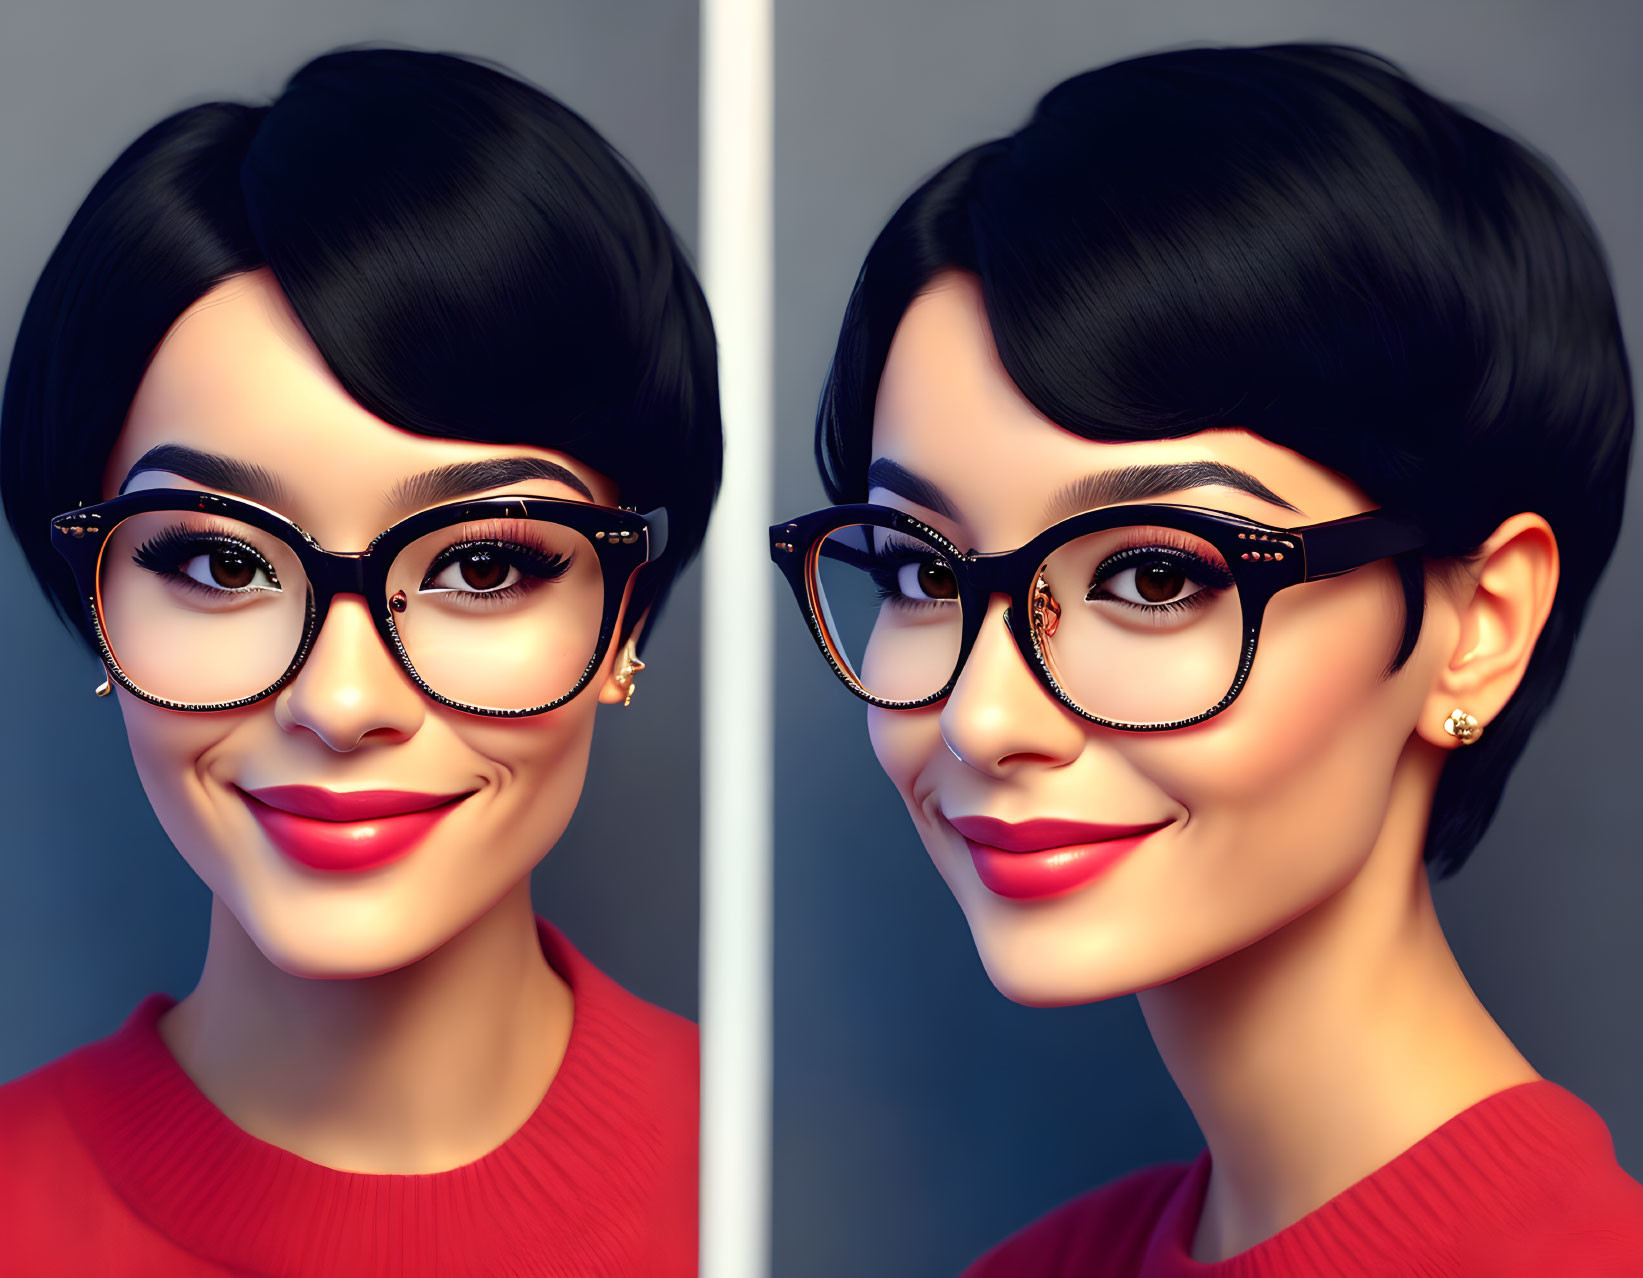 Digital portrait of woman with dark hair and cat-eye glasses in frontal and side view